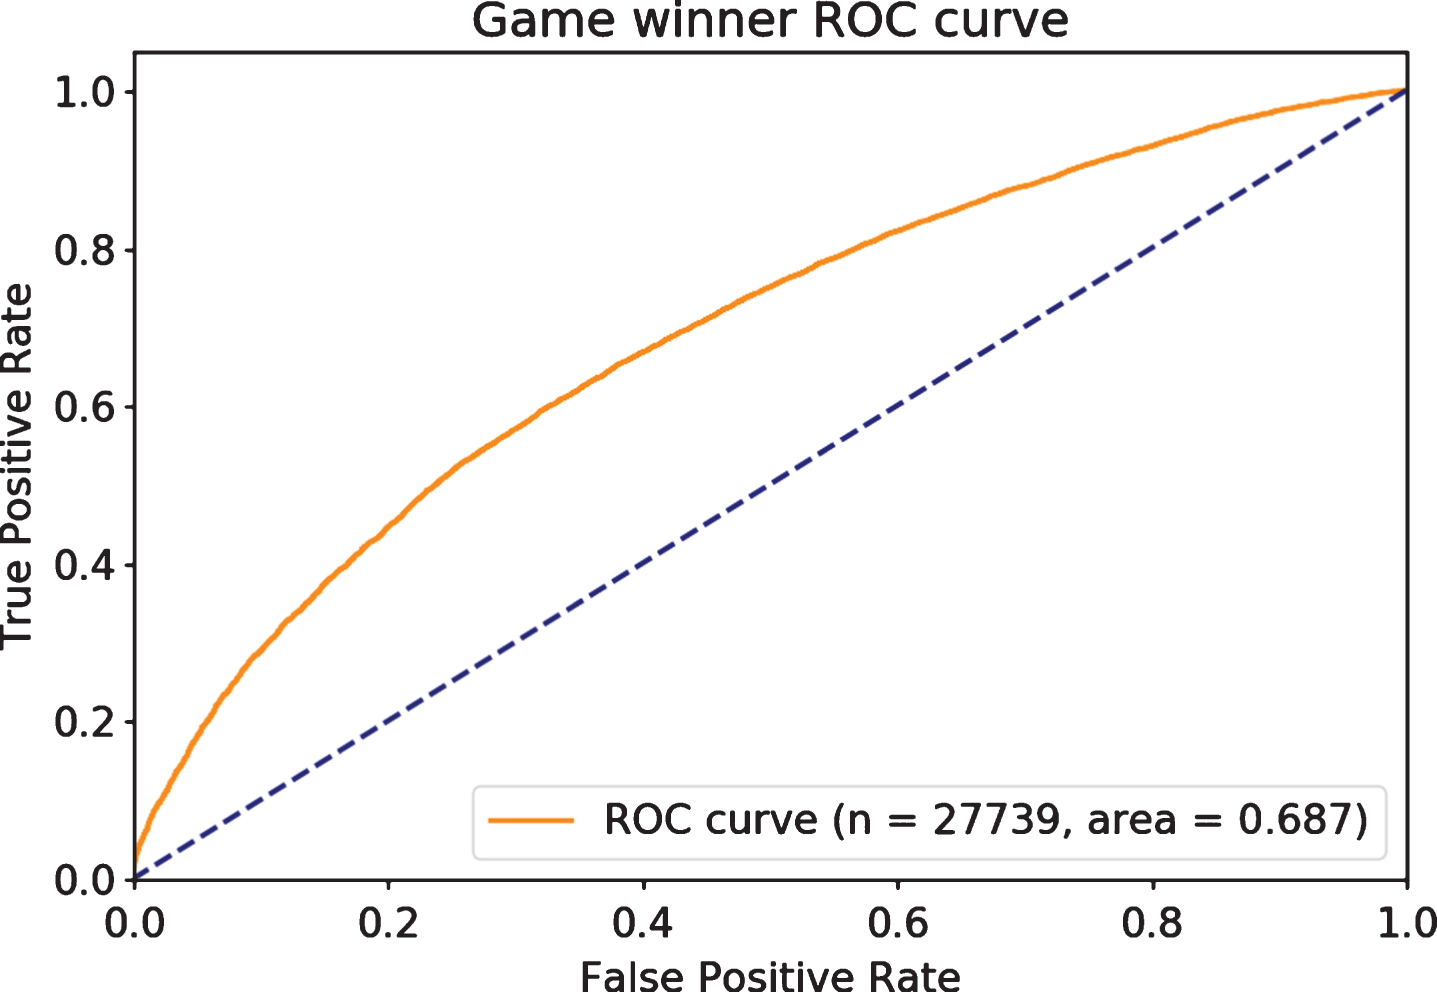 Individual games have substantial variance, but are predicted well.